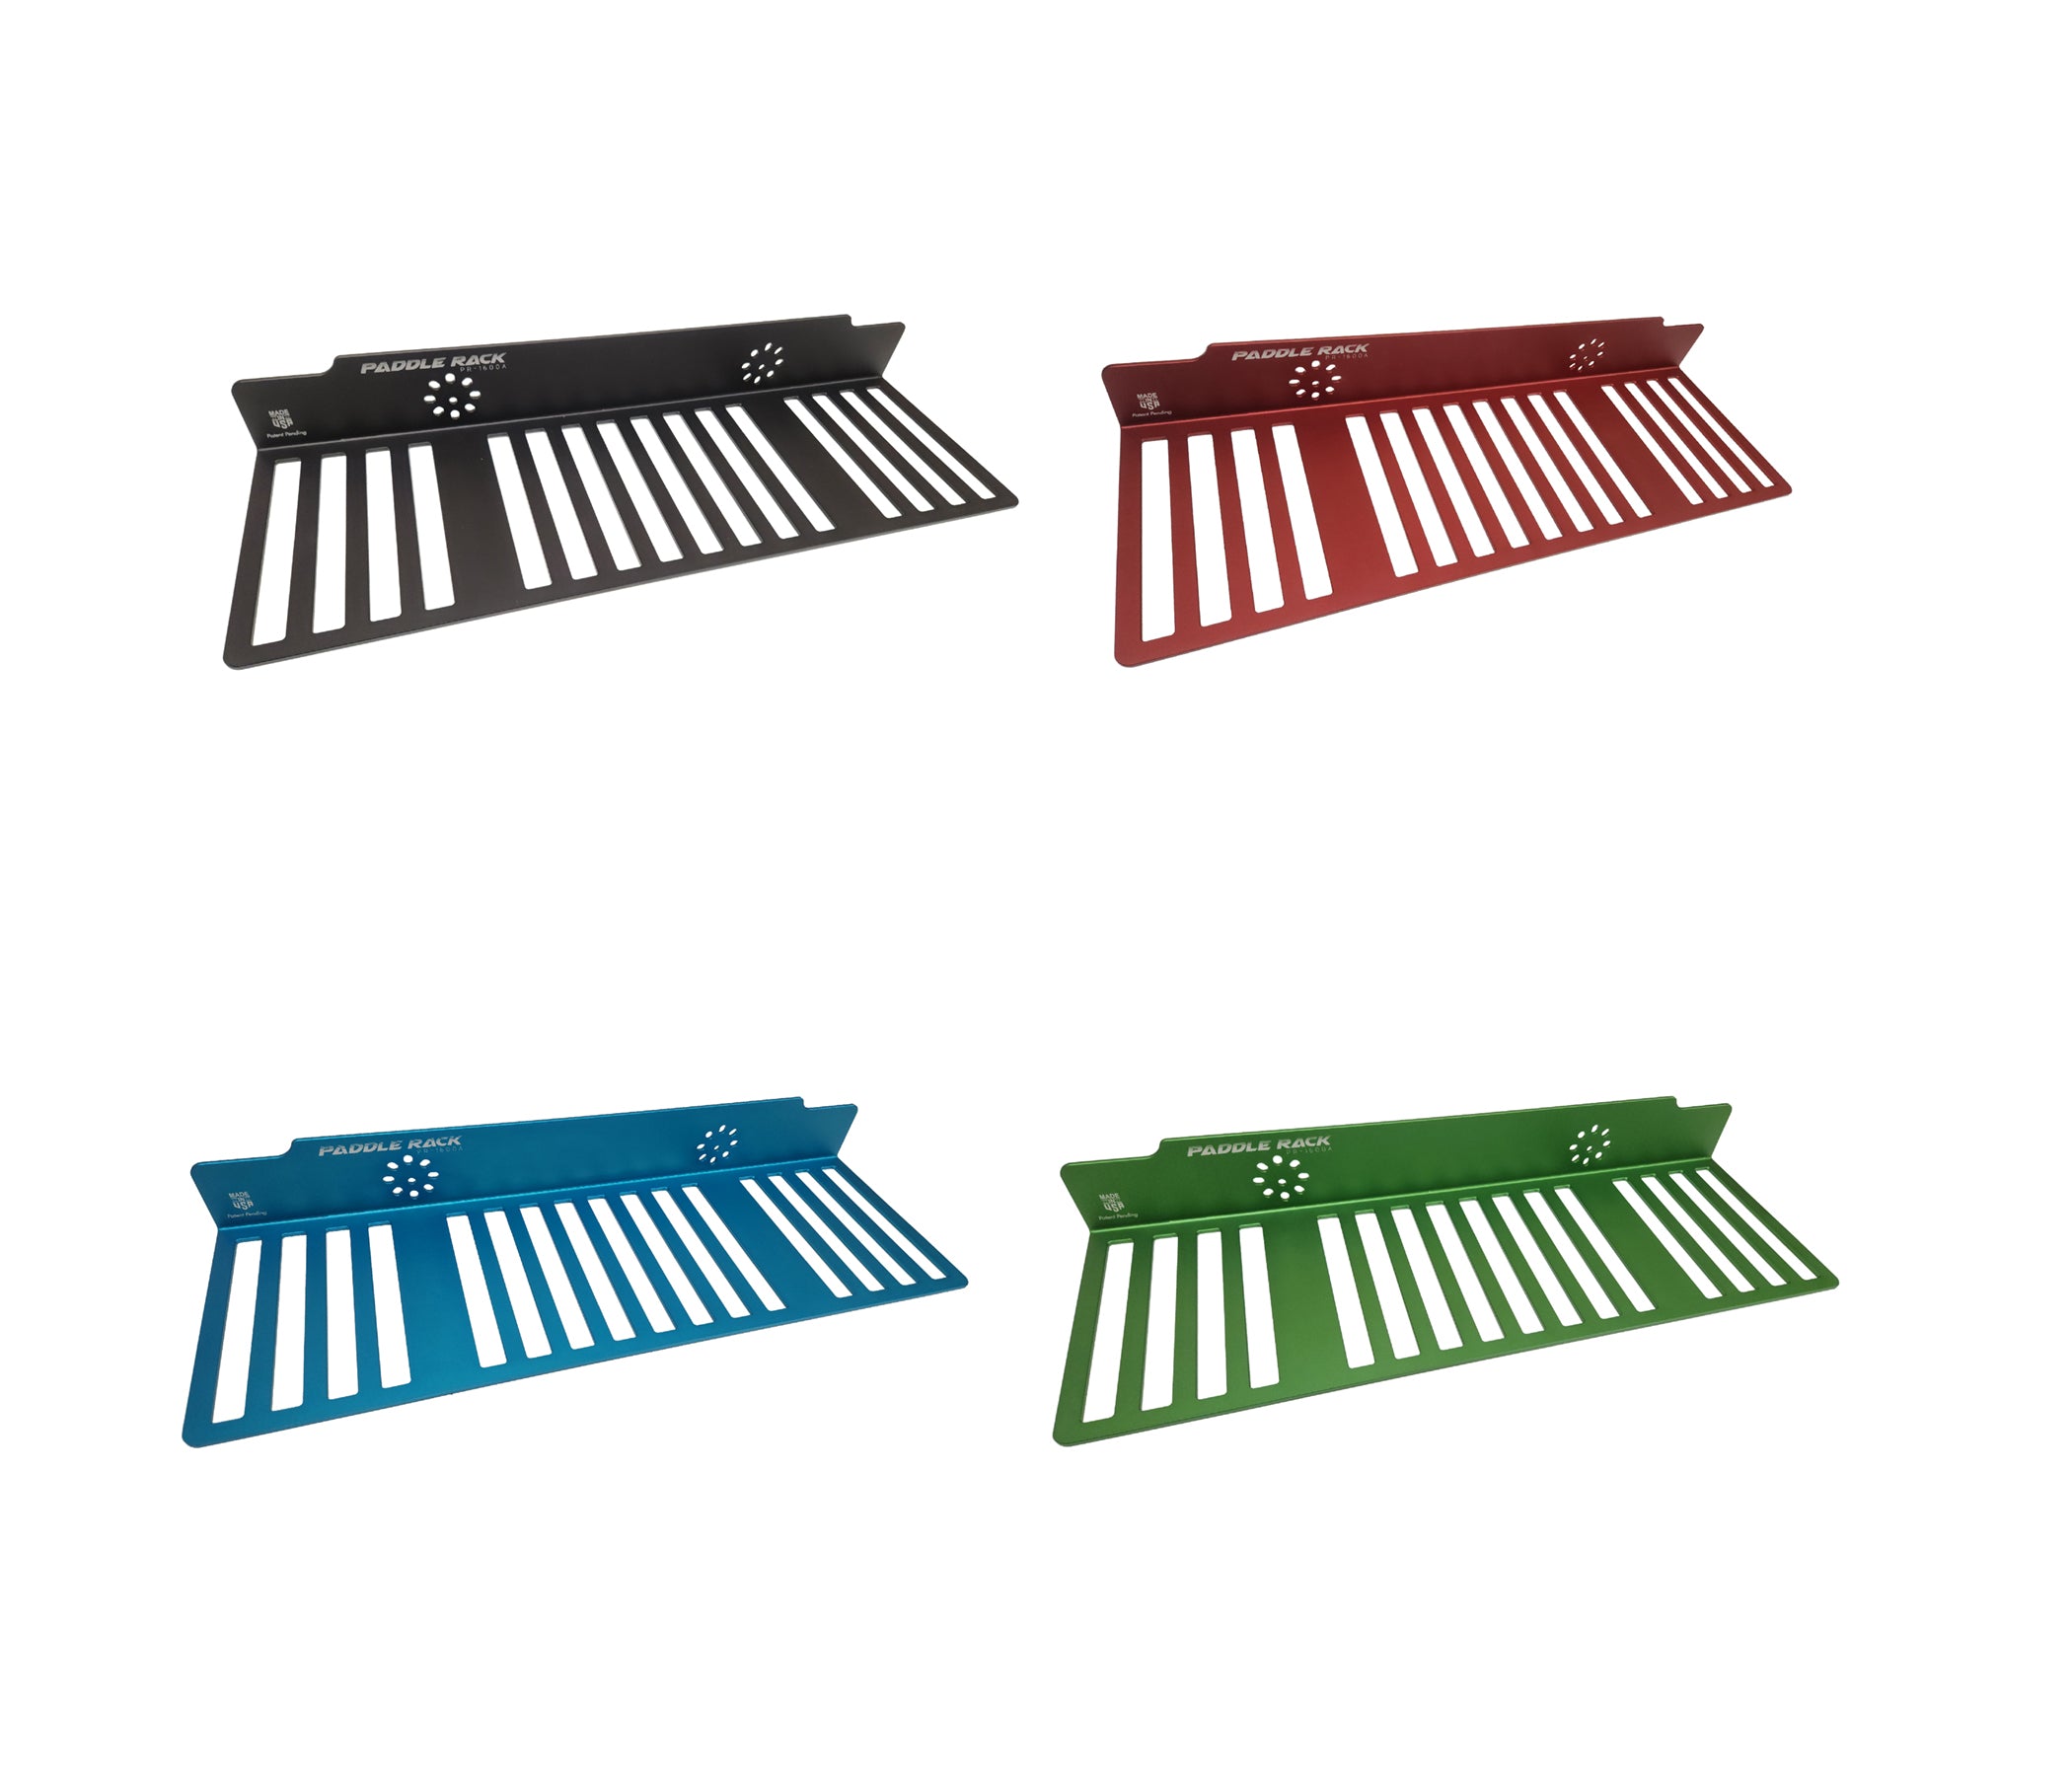 PR-1600A, High-Capacity Anodized Aluminum Pickleball Paddle Rack, 16-Paddle Holder (Pre-Order) - Craftworks NW, LLC